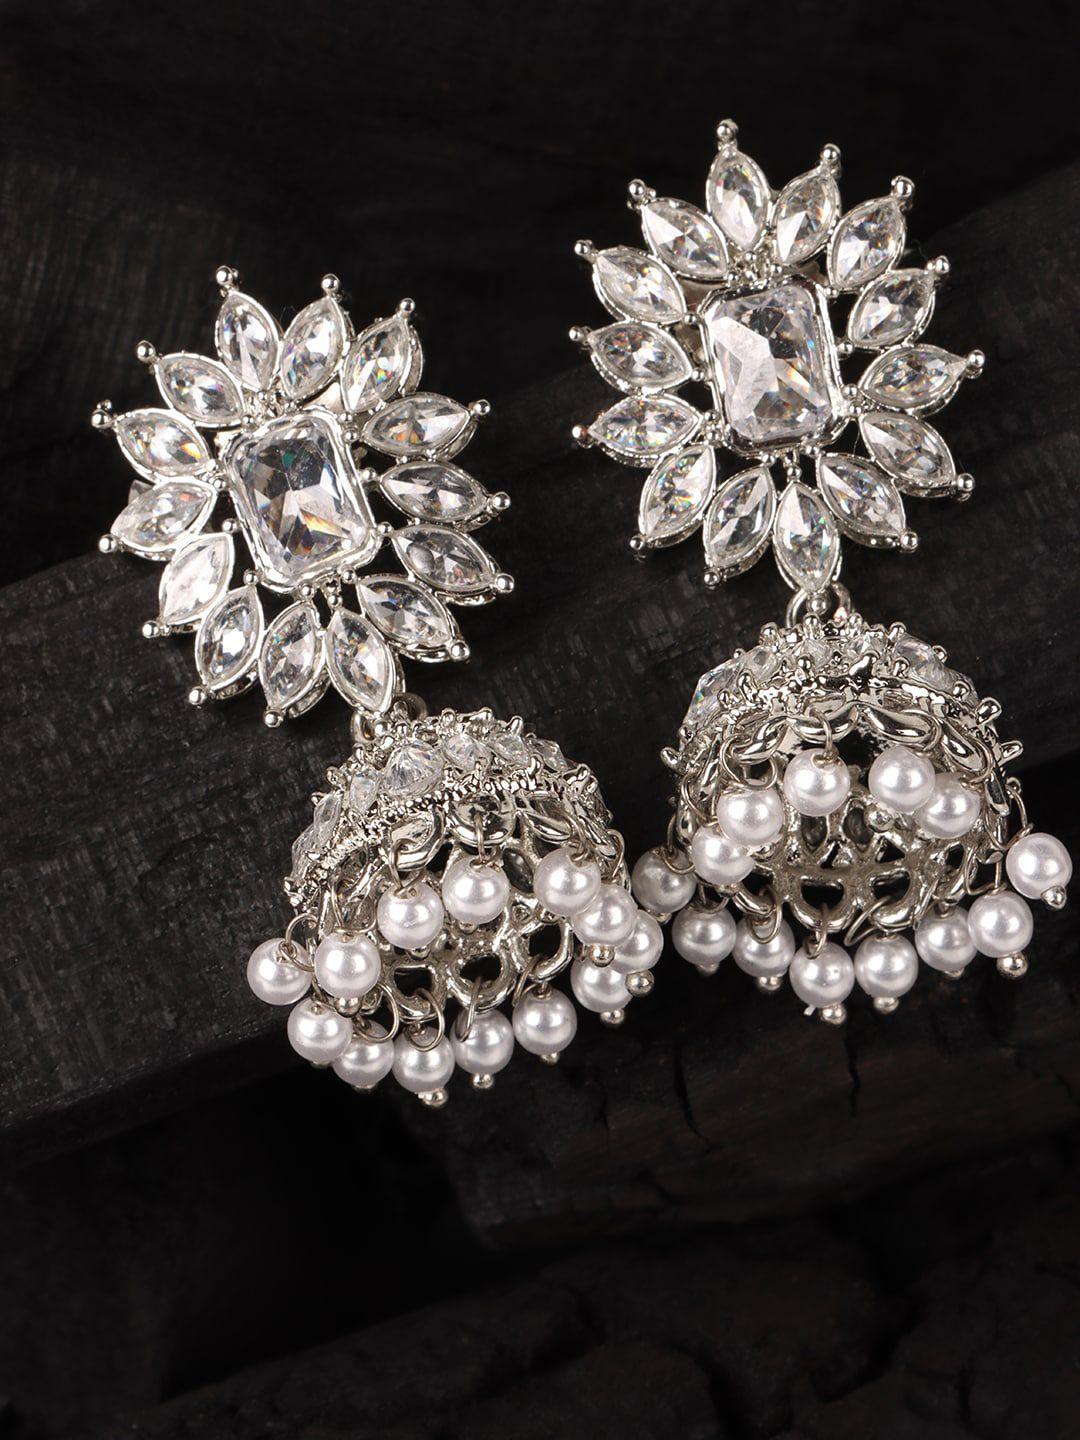 jewels gehna silver-toned & white dome shaped jhumkas earrings